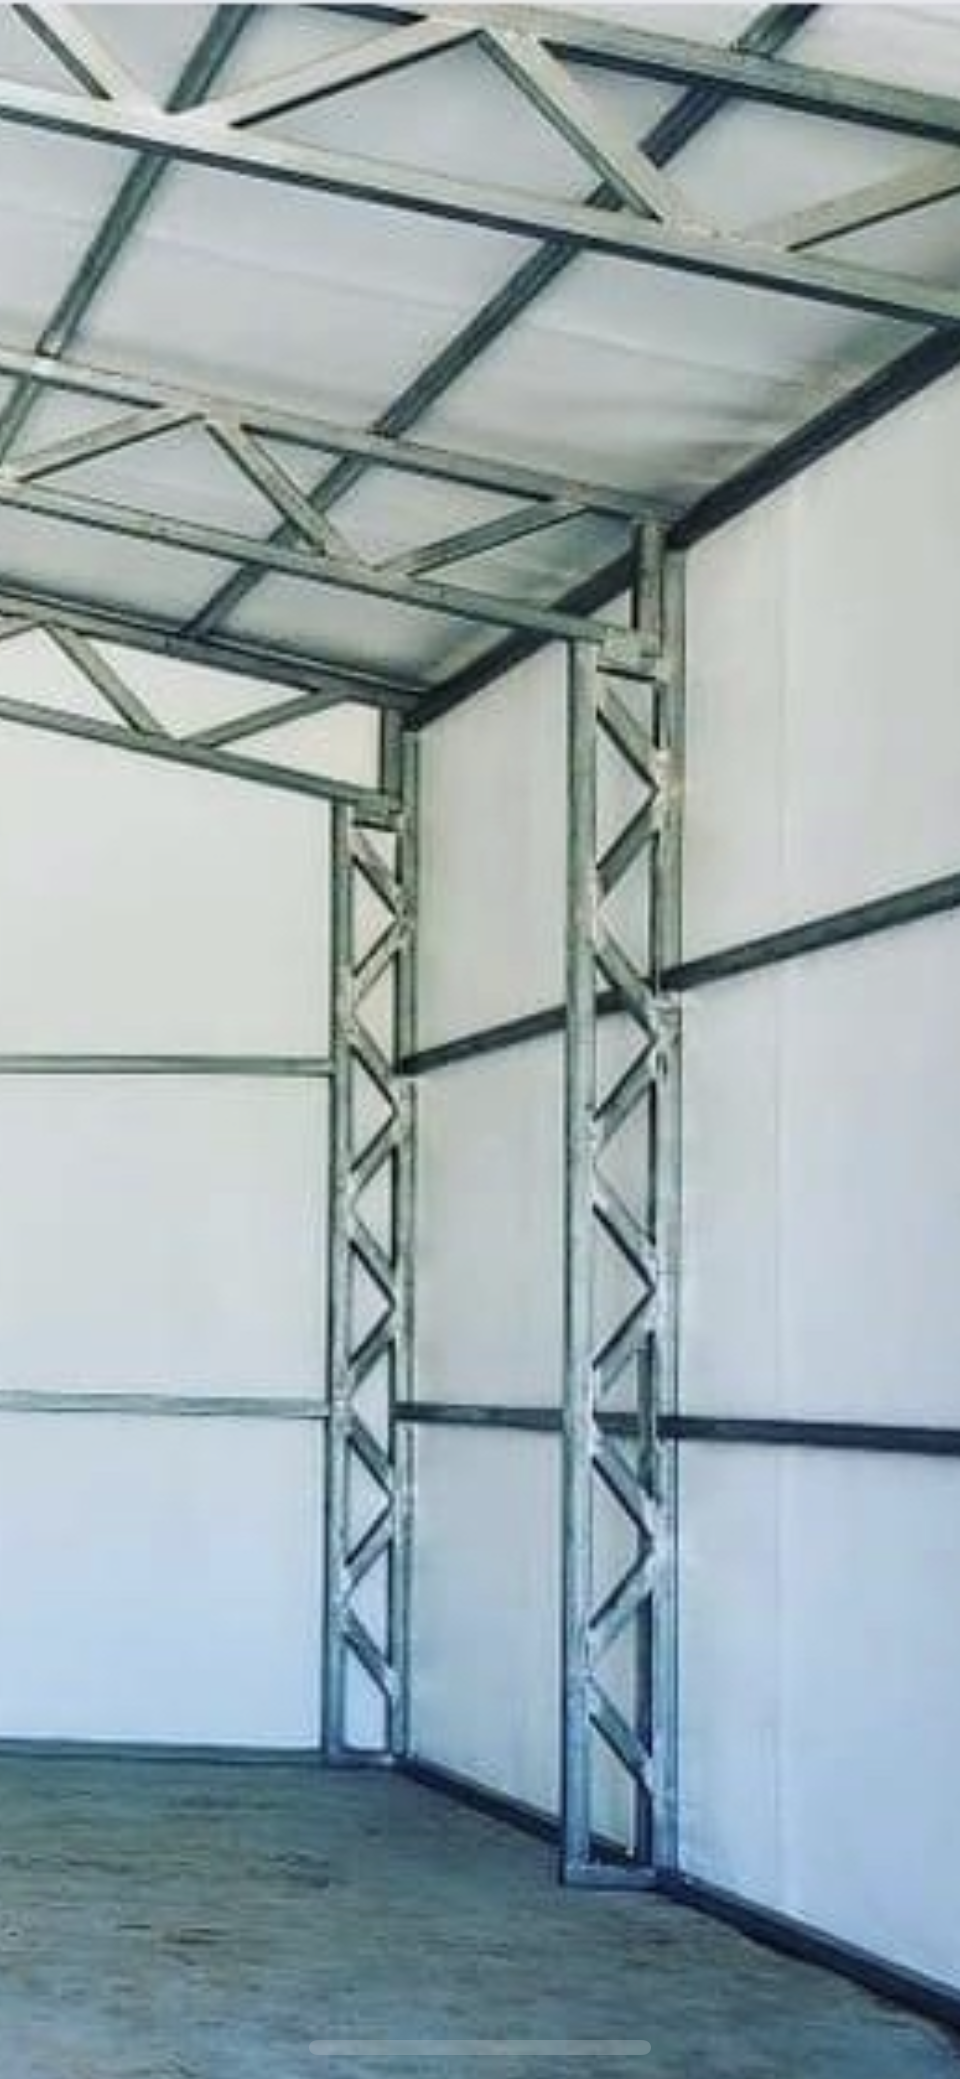 The inside of a building with a metal frame and white walls.